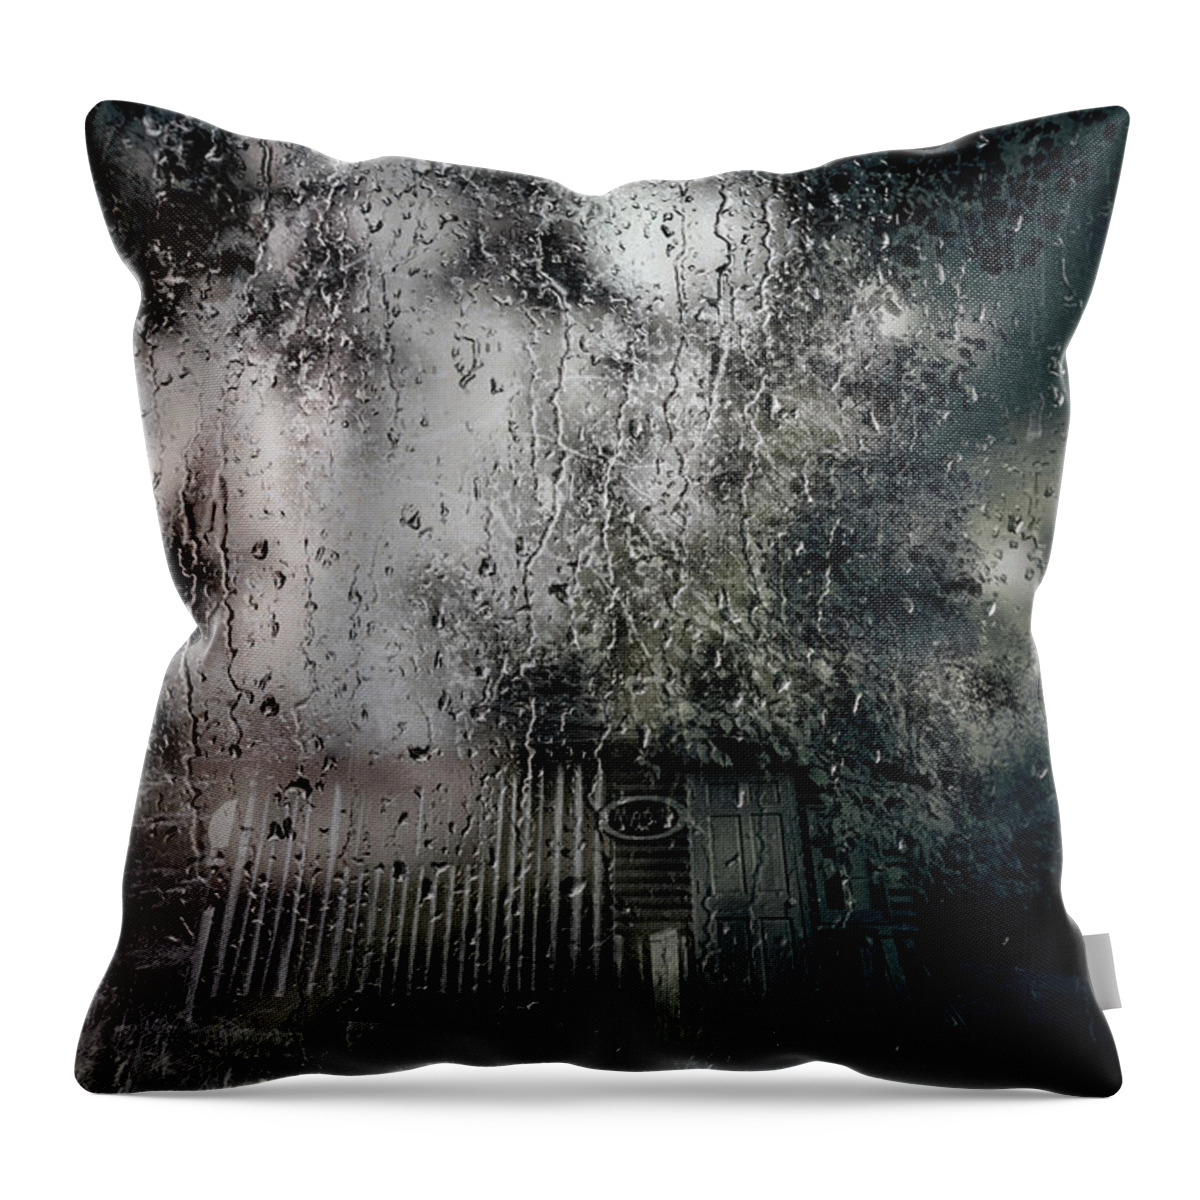  Throw Pillow featuring the photograph Scarred Porch. Warm Kitchen. by Cynthia Dickinson